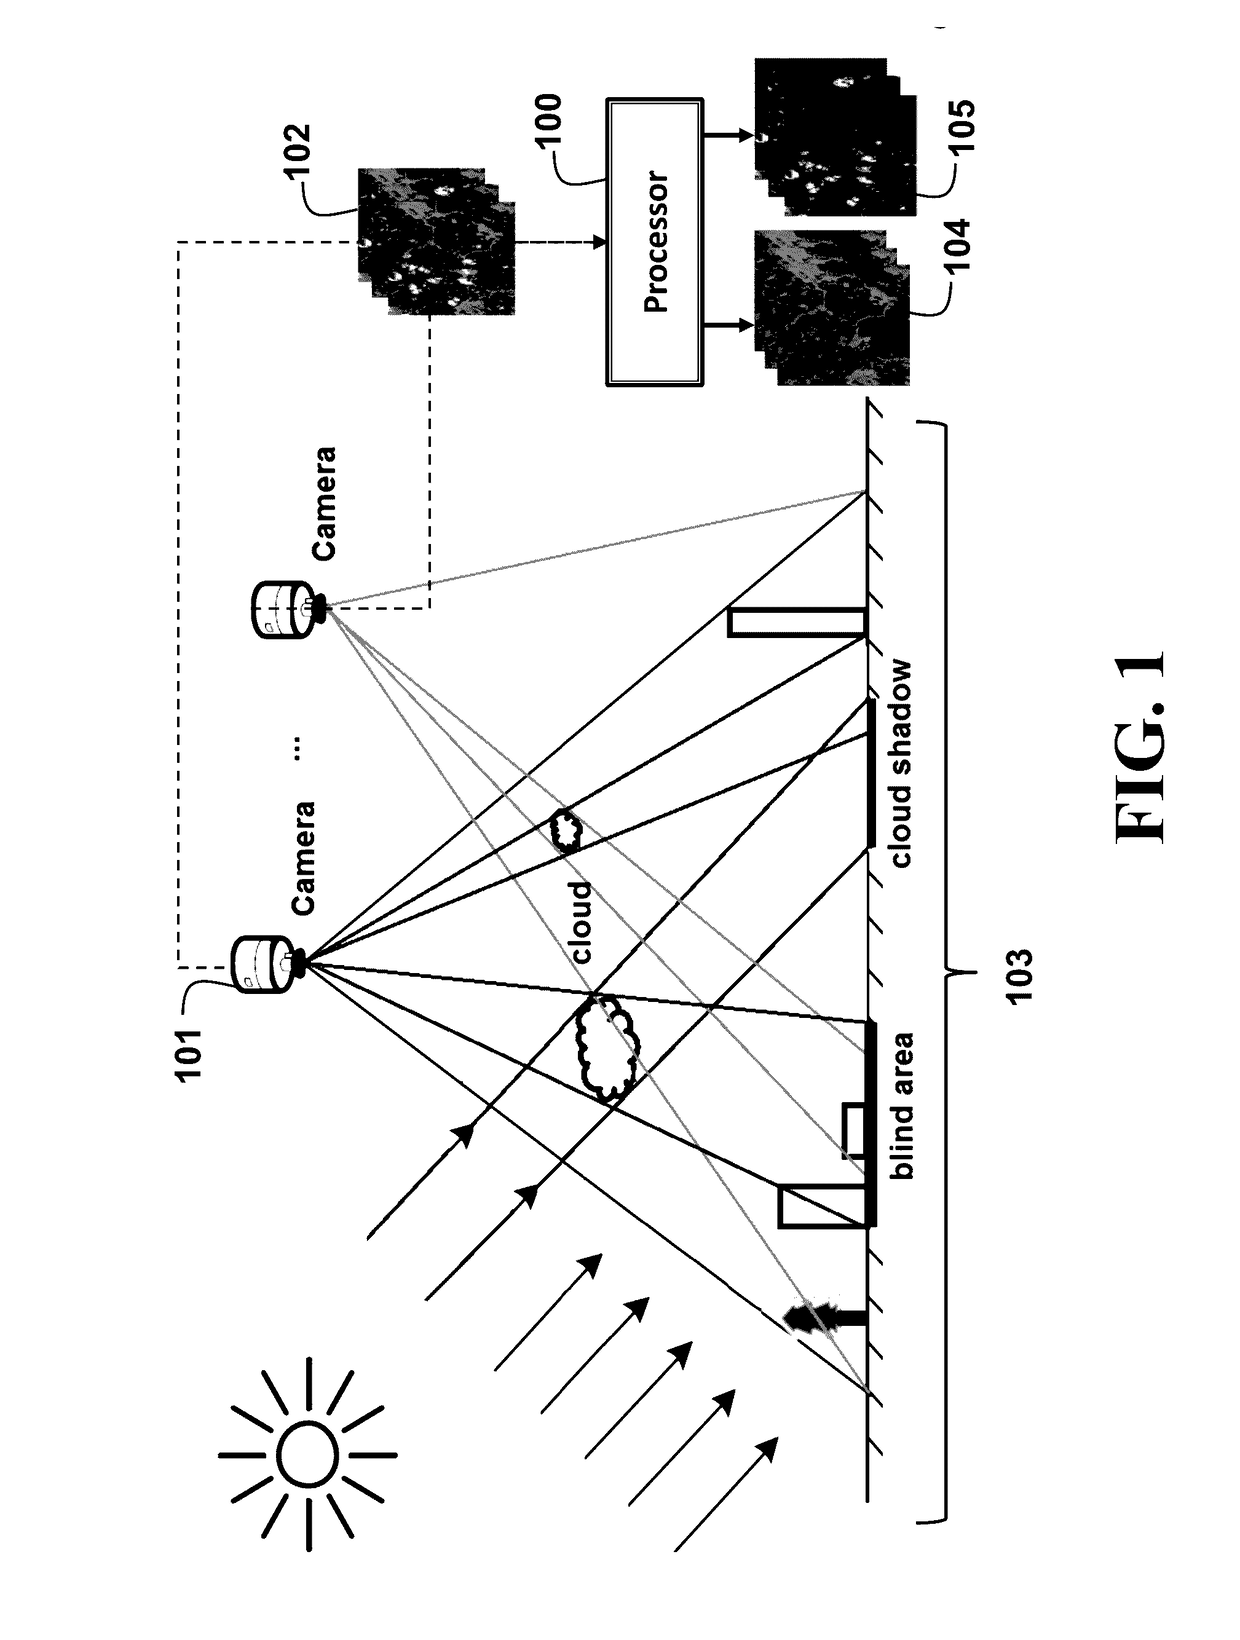 System and Method for Processing Images using Online Tensor Robust Principal Component Analysis